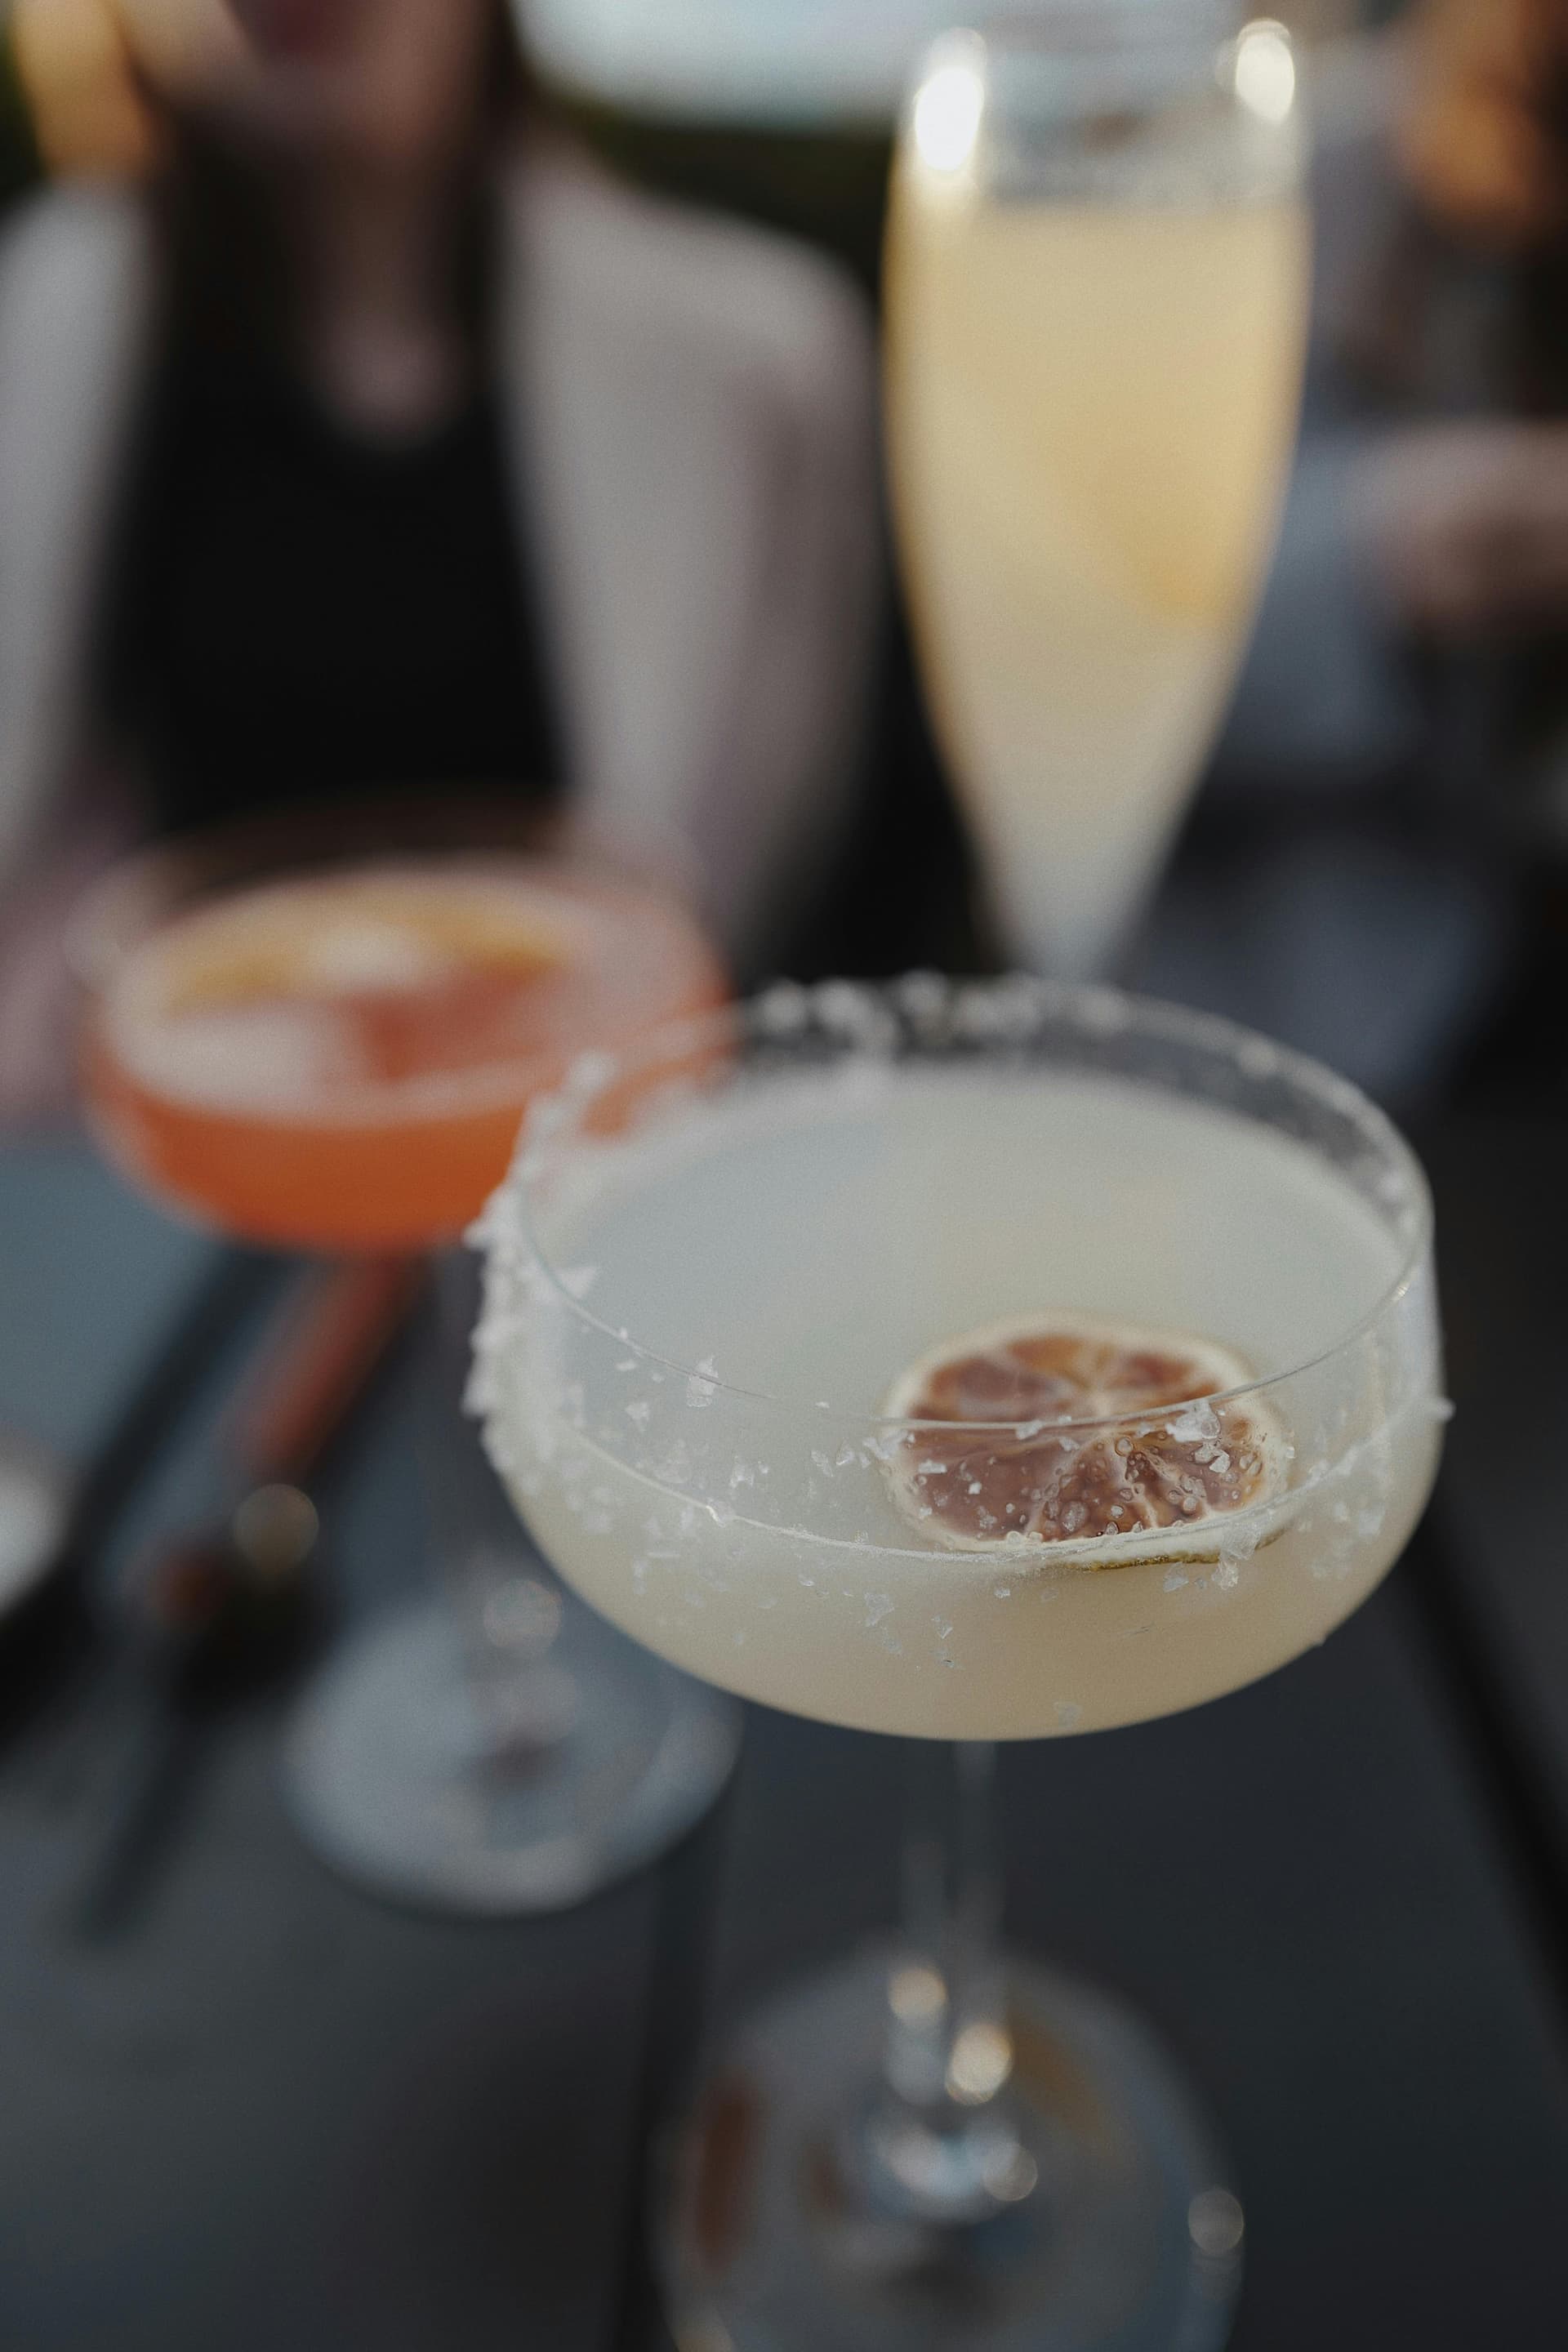 To Salt or Not To Salt The Margarita Rim? Bonus: Expert Tips On How To Achieve It Perfectly